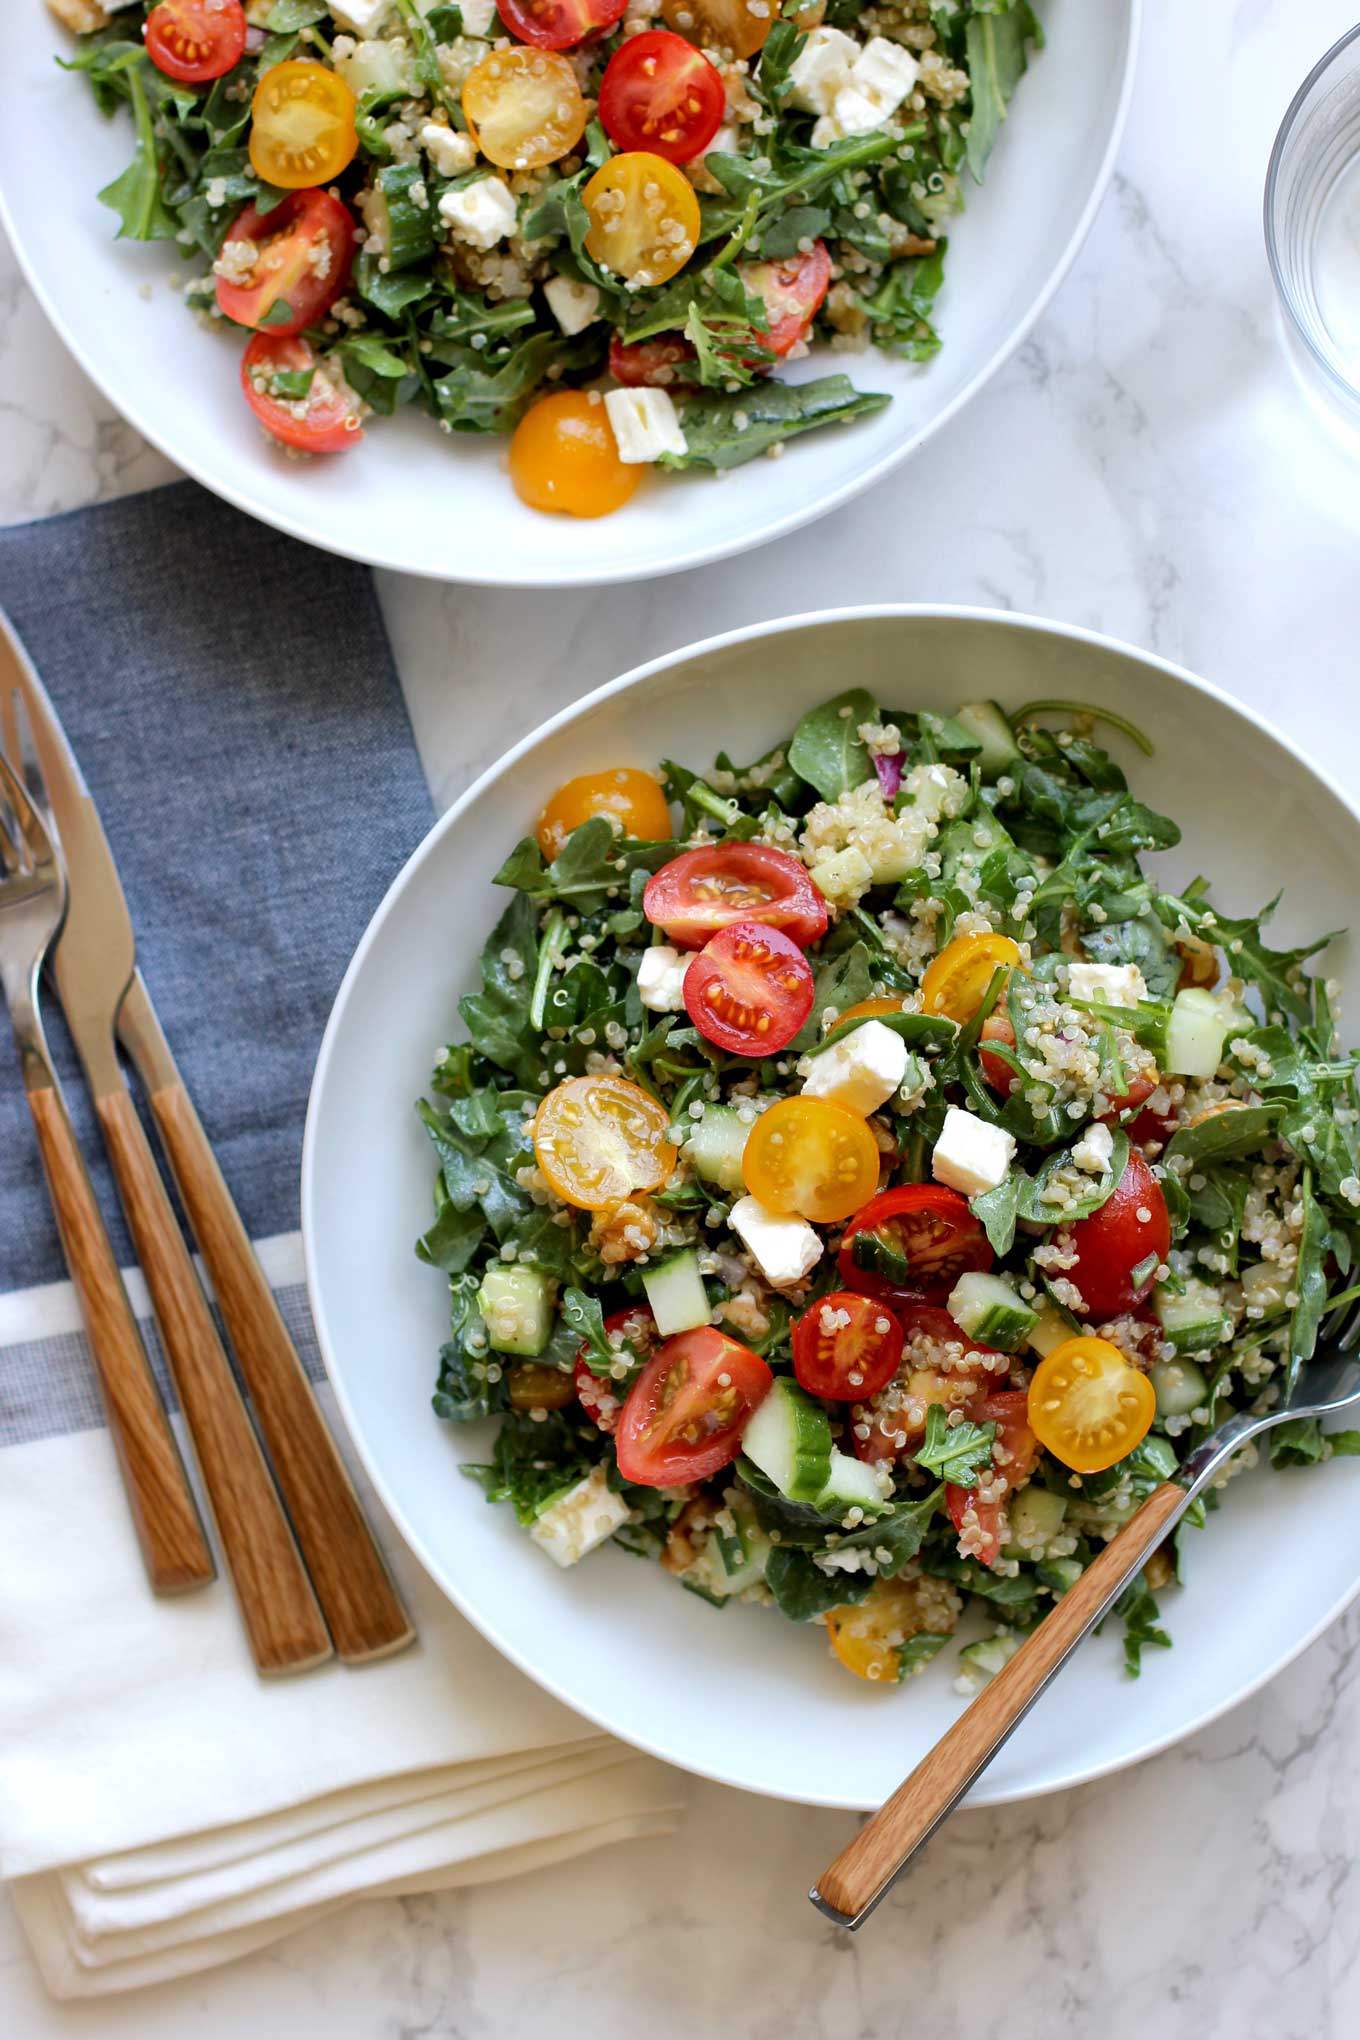 Quinoa-Salad-With-Cherry-Tomatoes-and-Cucumbers. A colorful, easy, summer salad.